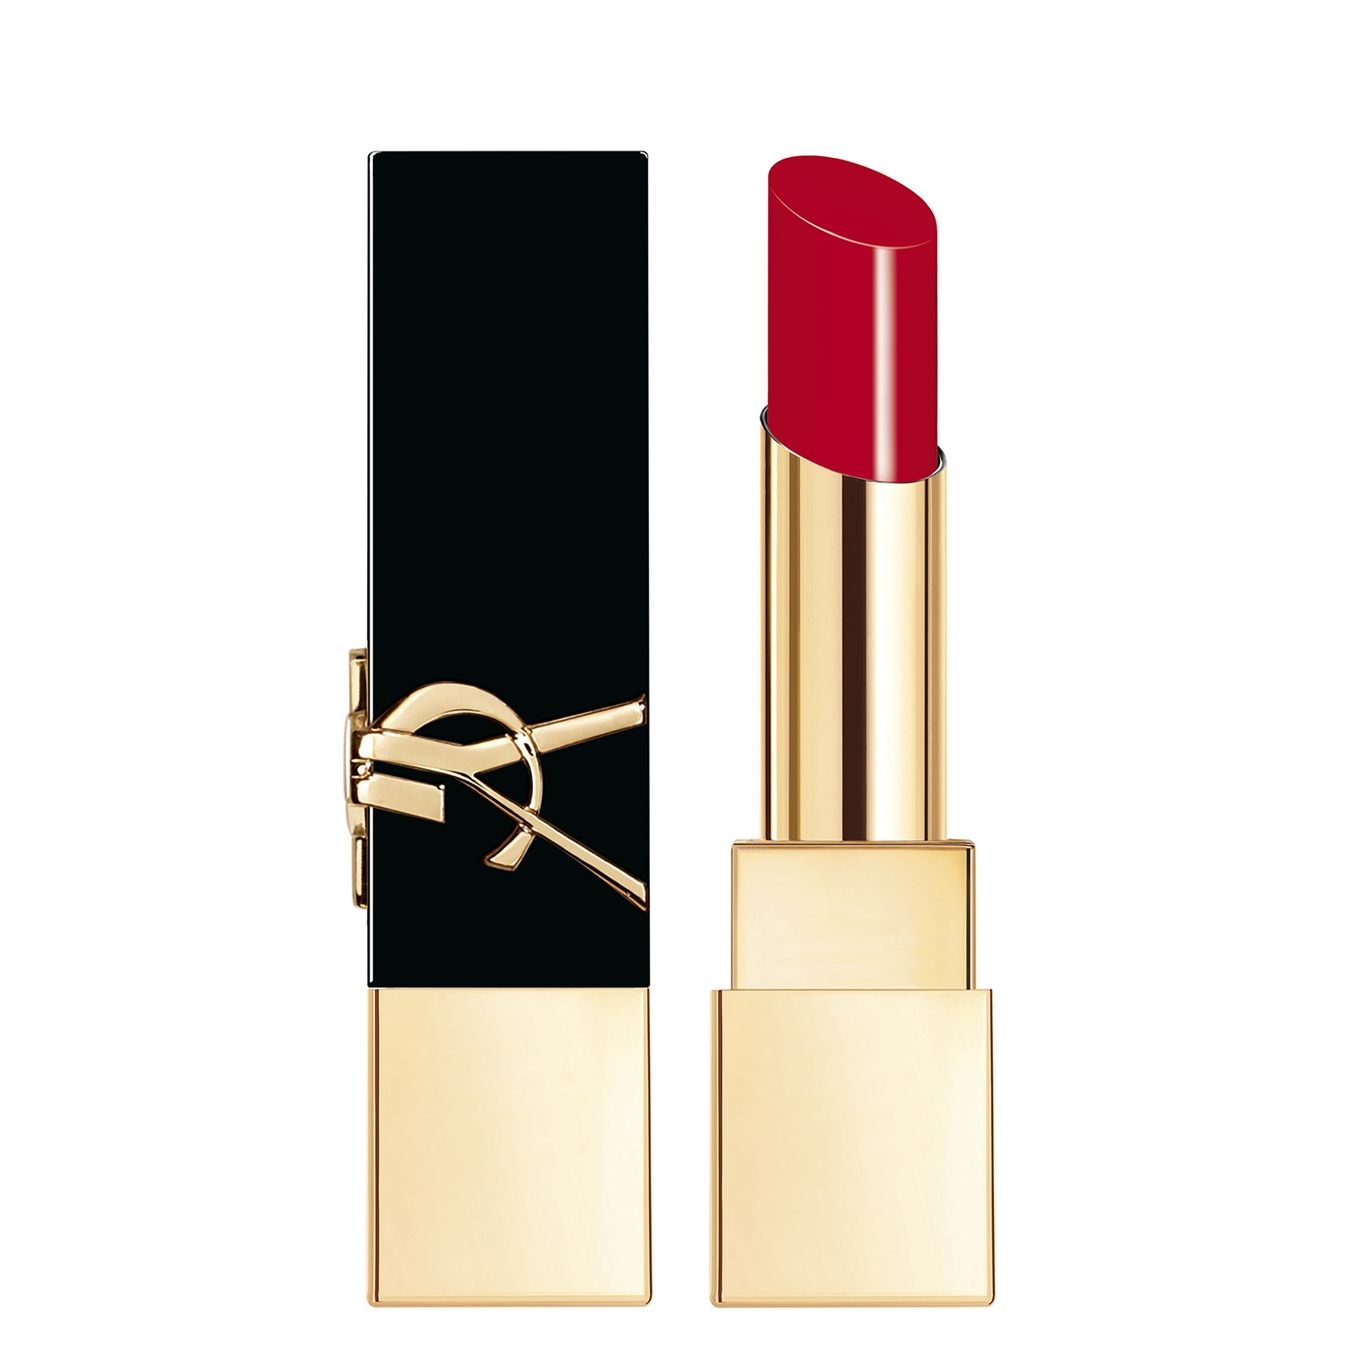 Yves Saint Laurent The Bold Lipstick 02 Wilful Red, Lipstick, Bold